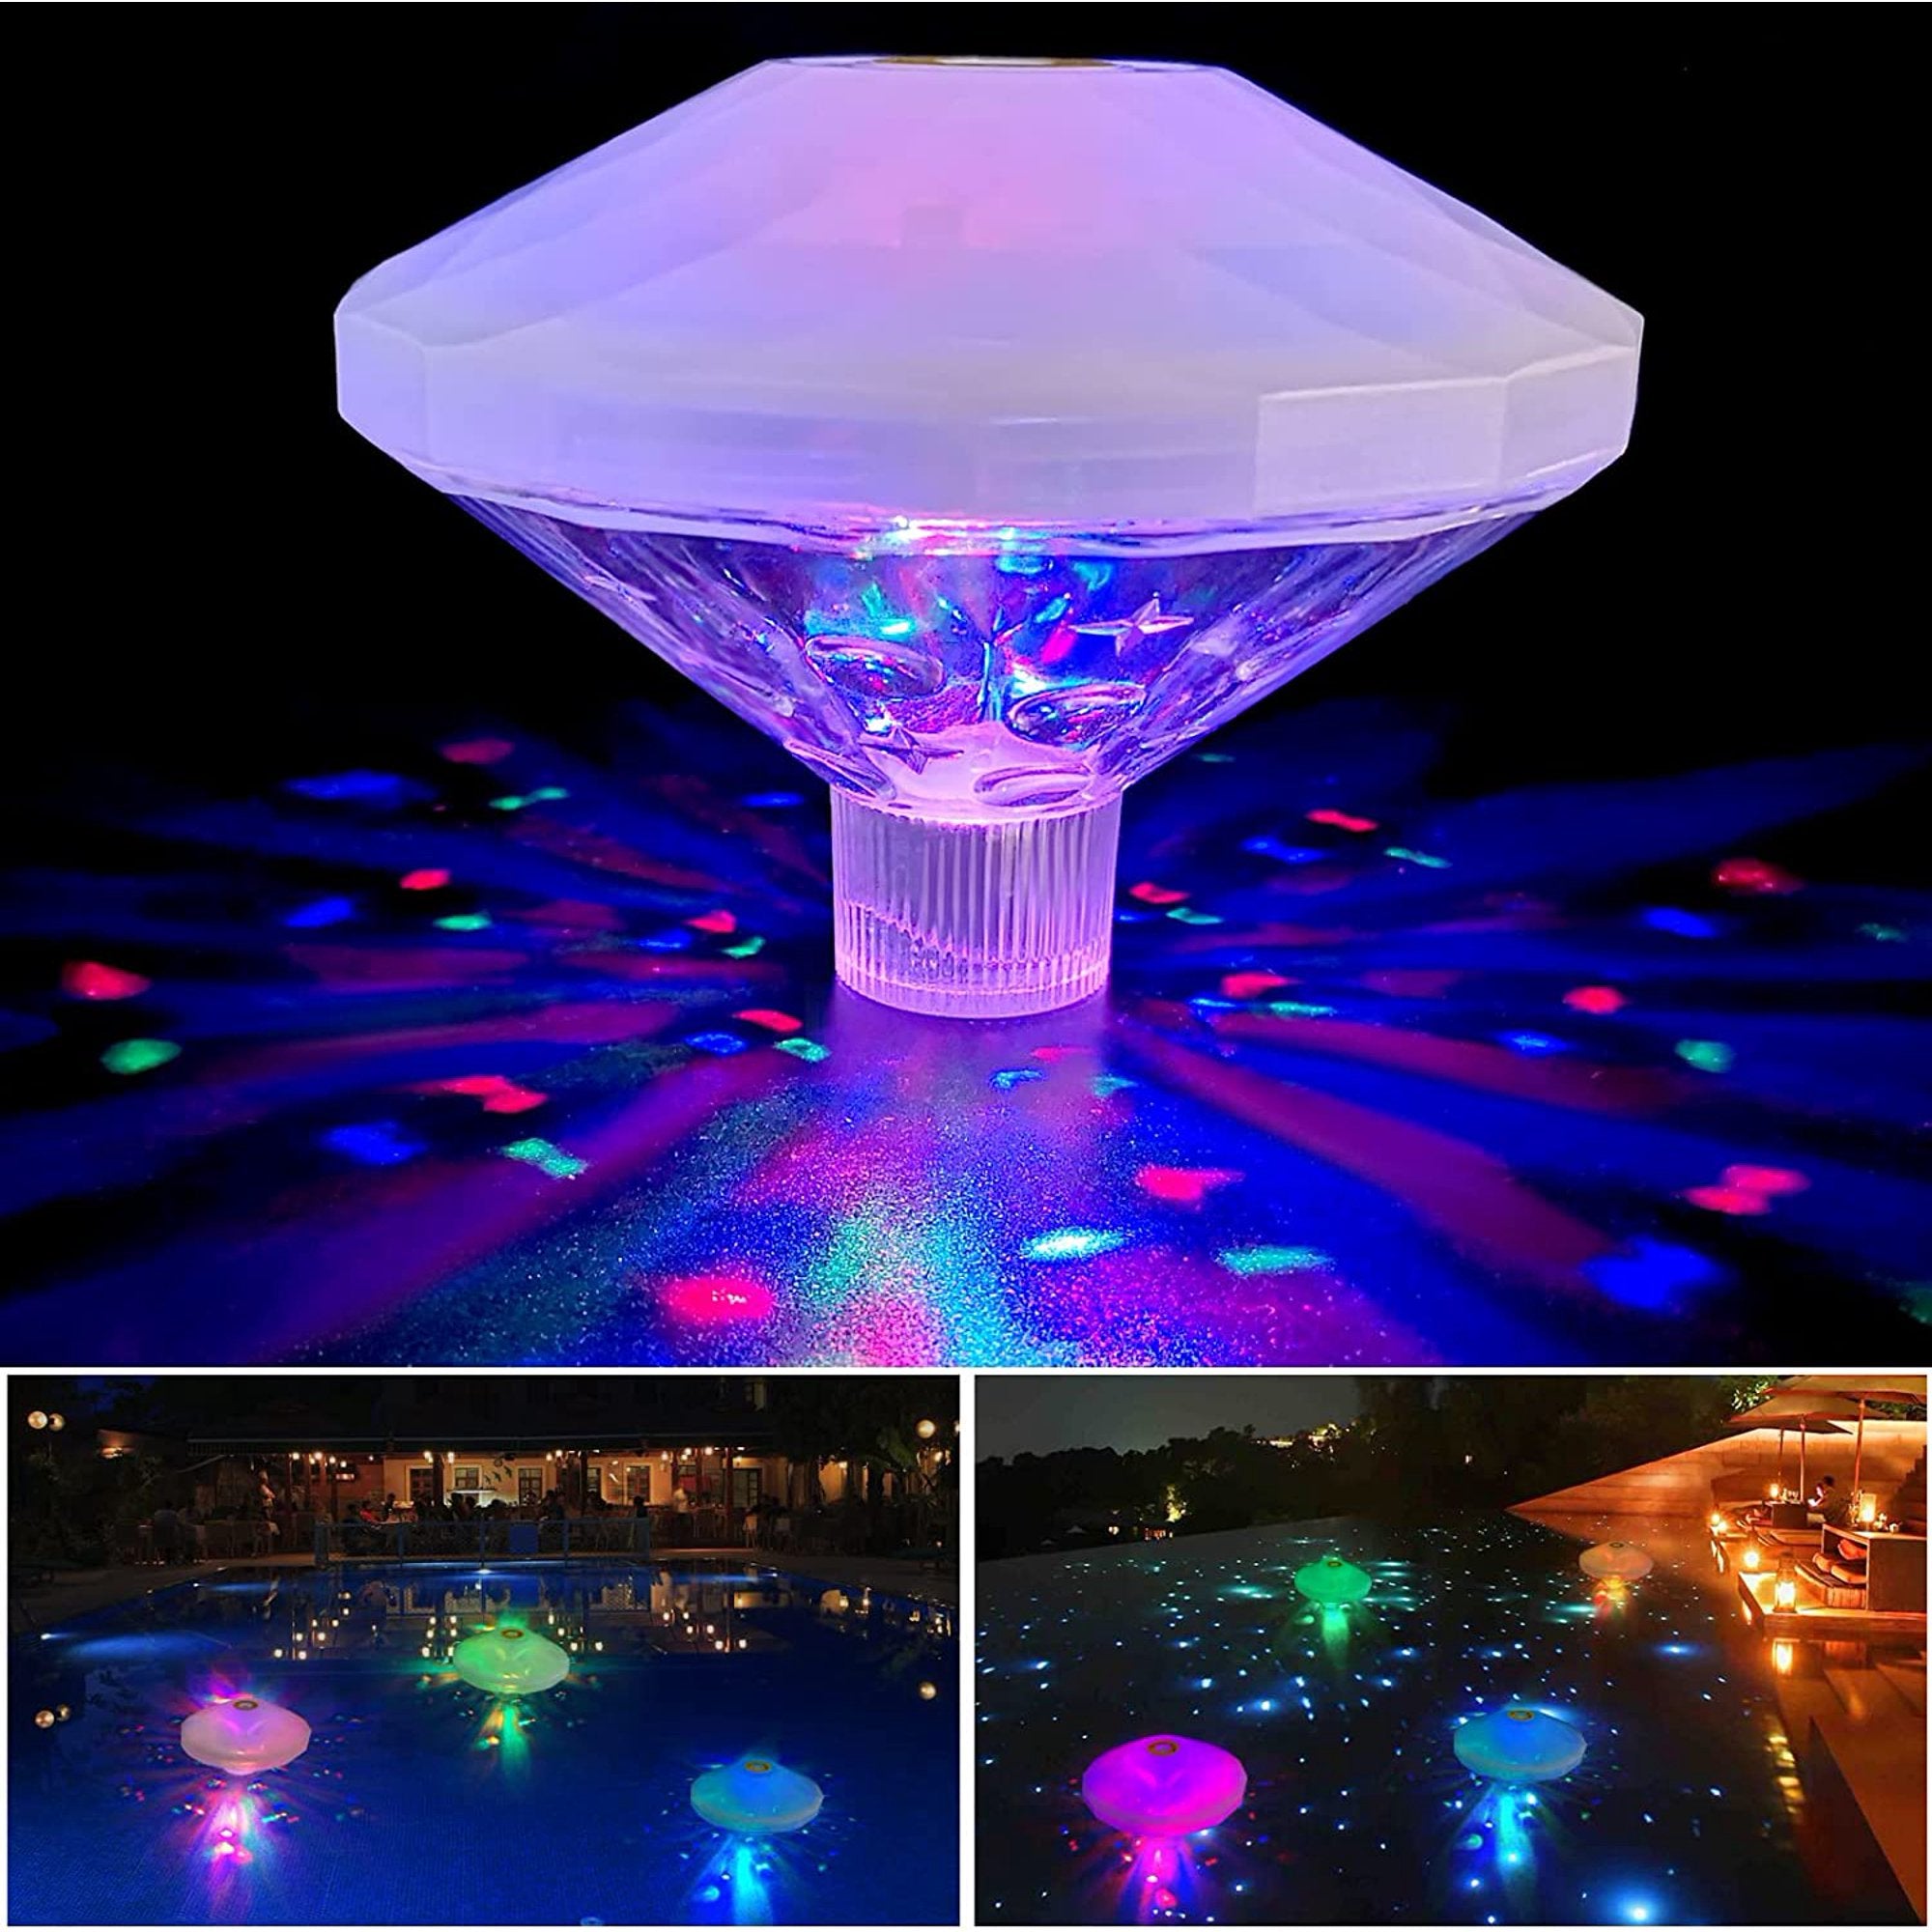 Swimming Pool Lights, LED Color Changing Floating Pool Lights with 8 Modes Lighting Underwater Battery Powered Waterproof Pool Light for Swimming Pool Pond Fountain Garden Party Decoration